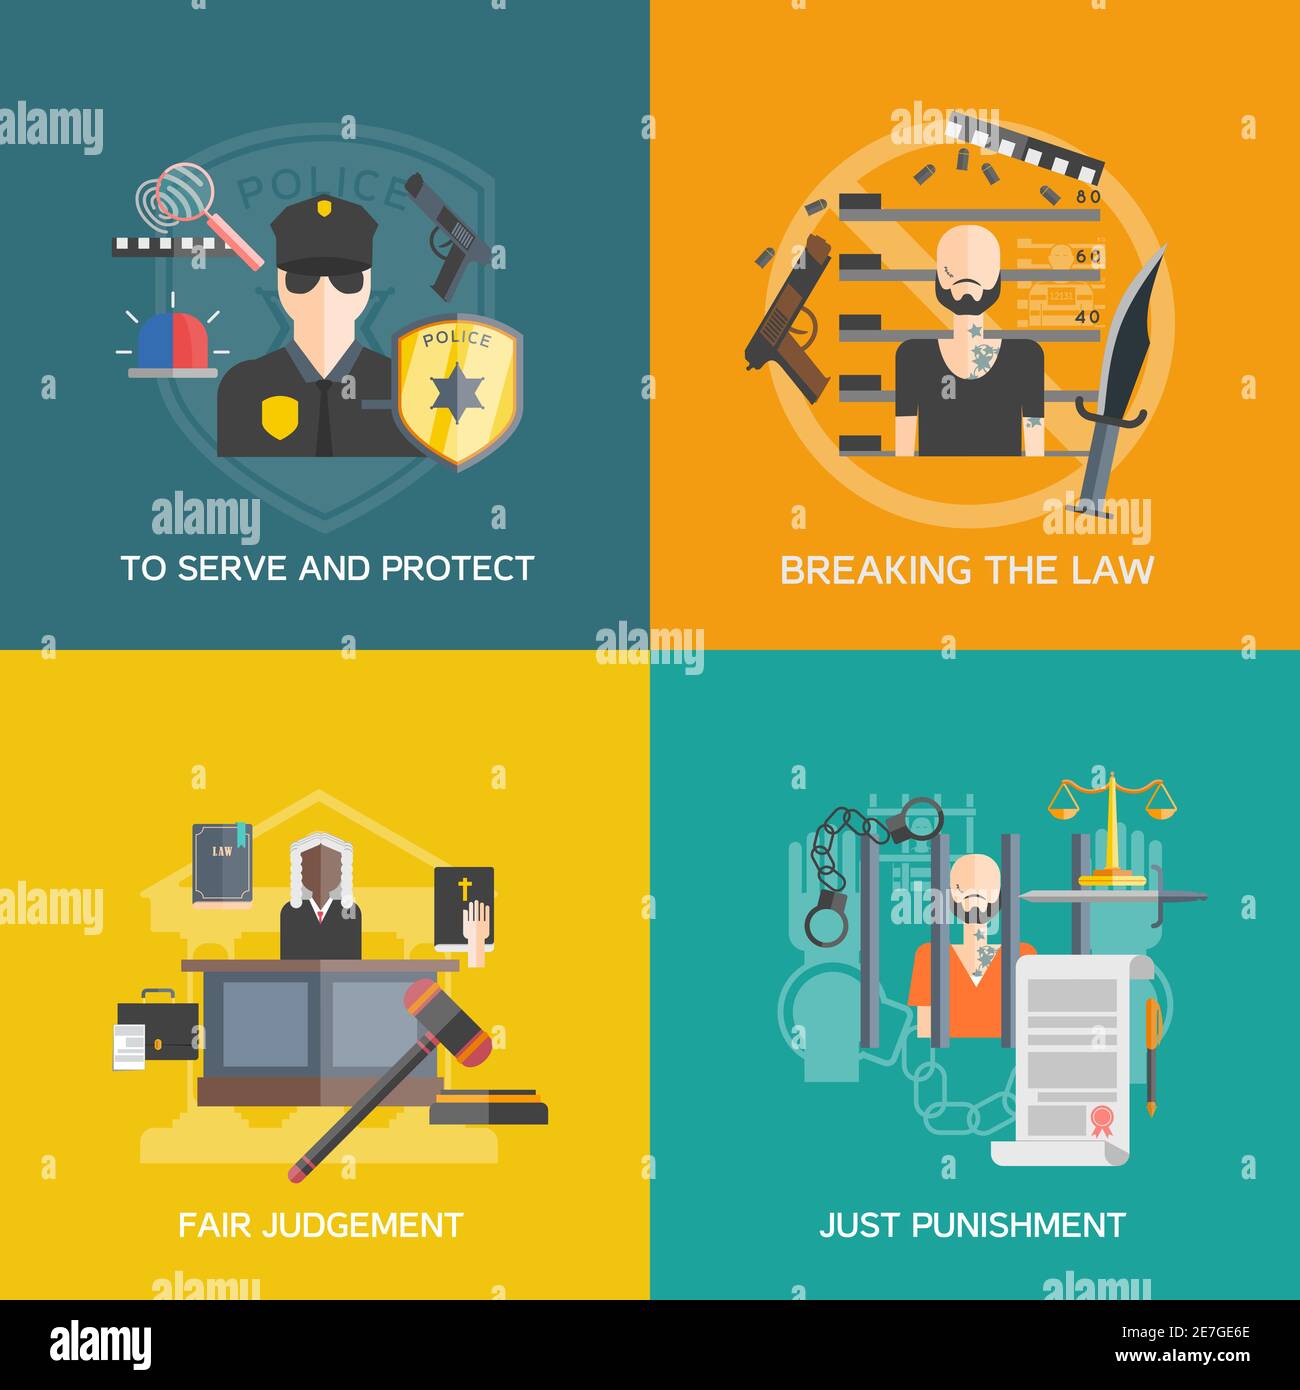 Fair judgement and just punishment icons set with breaking the law and police flat isolated vector illustration Stock Vector